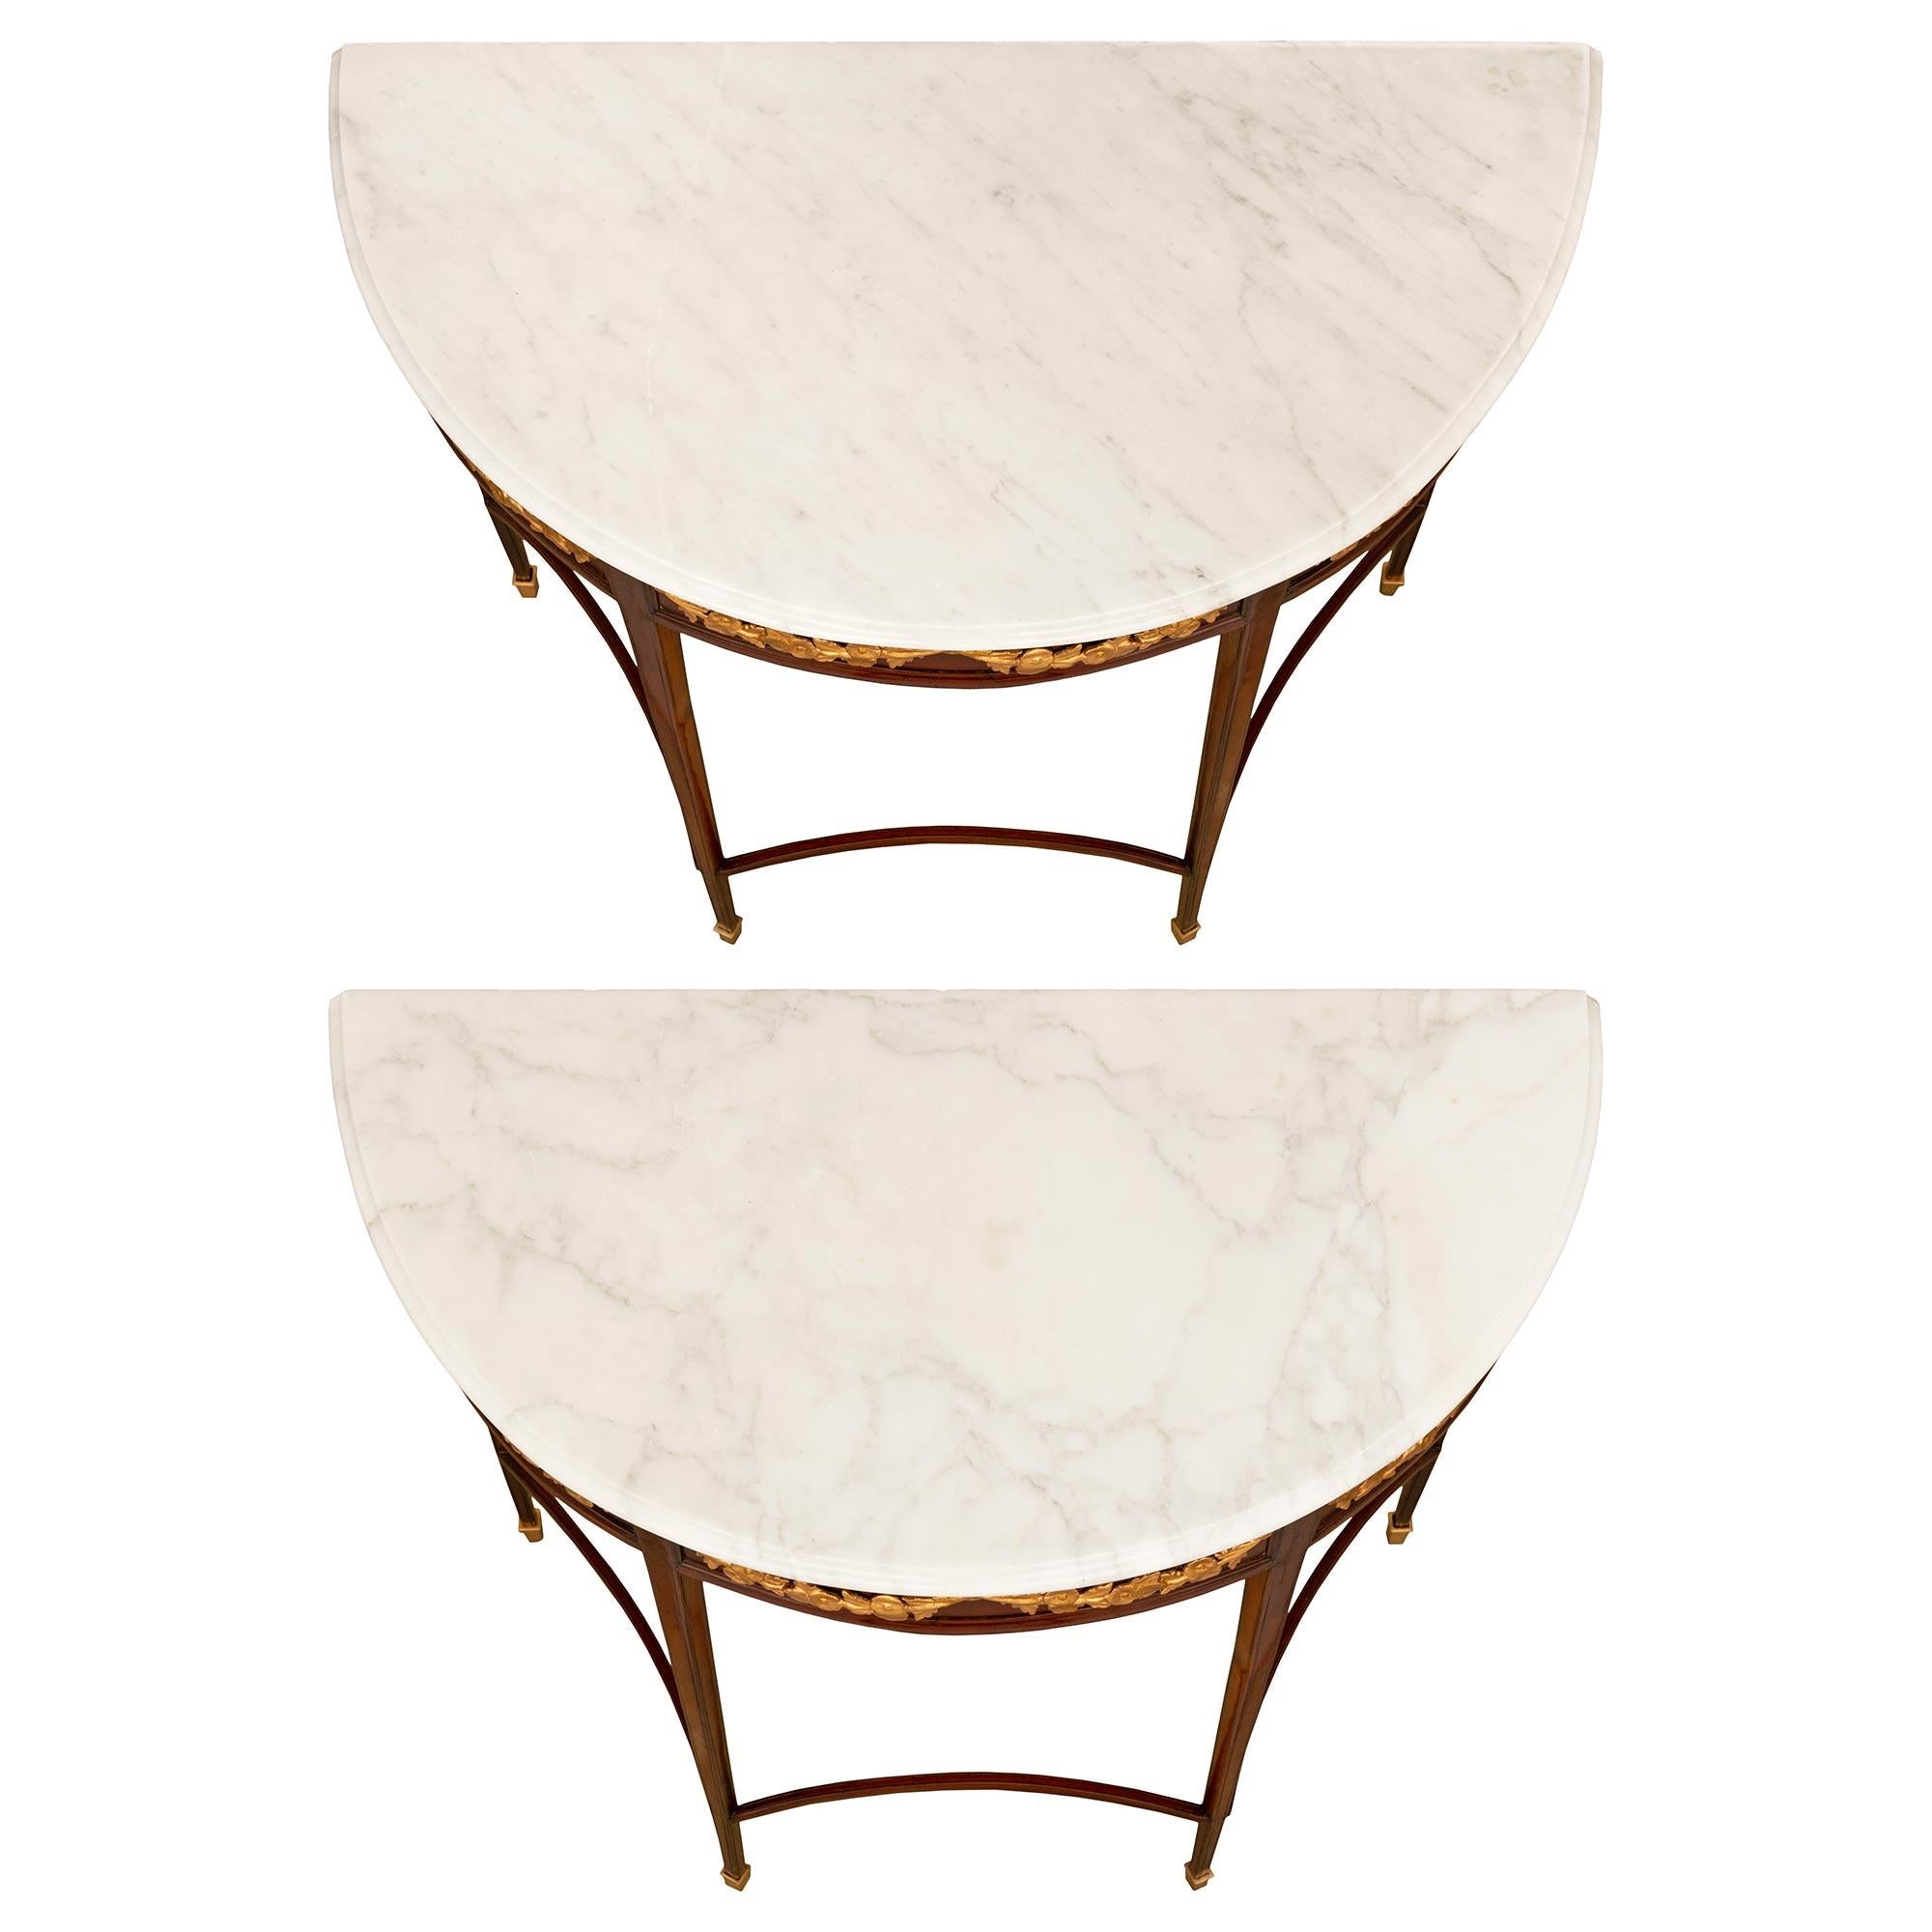 A most elegant pair of Italian 19th century Louis XVI st. Mahogany, Giltwood, Ormolu and white Carrara marble consoles. The pair of freestanding 'D' shaped consoles are raised on four square tapered legs with mottled corners and ending with Ormolu